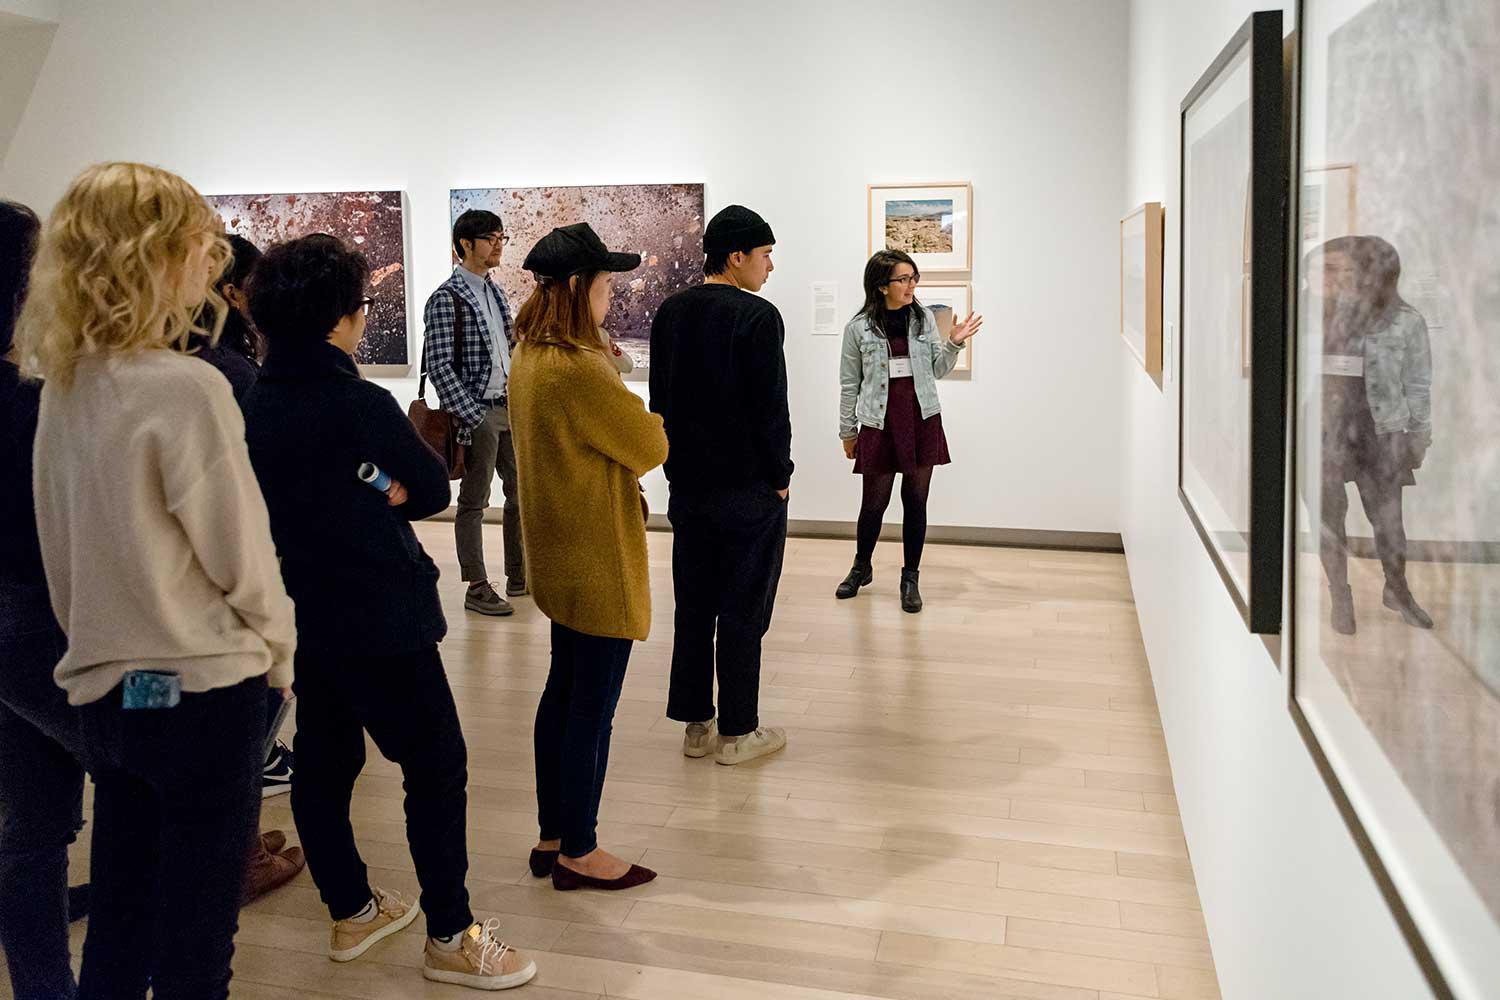 A docent leading a tour of an exhibition